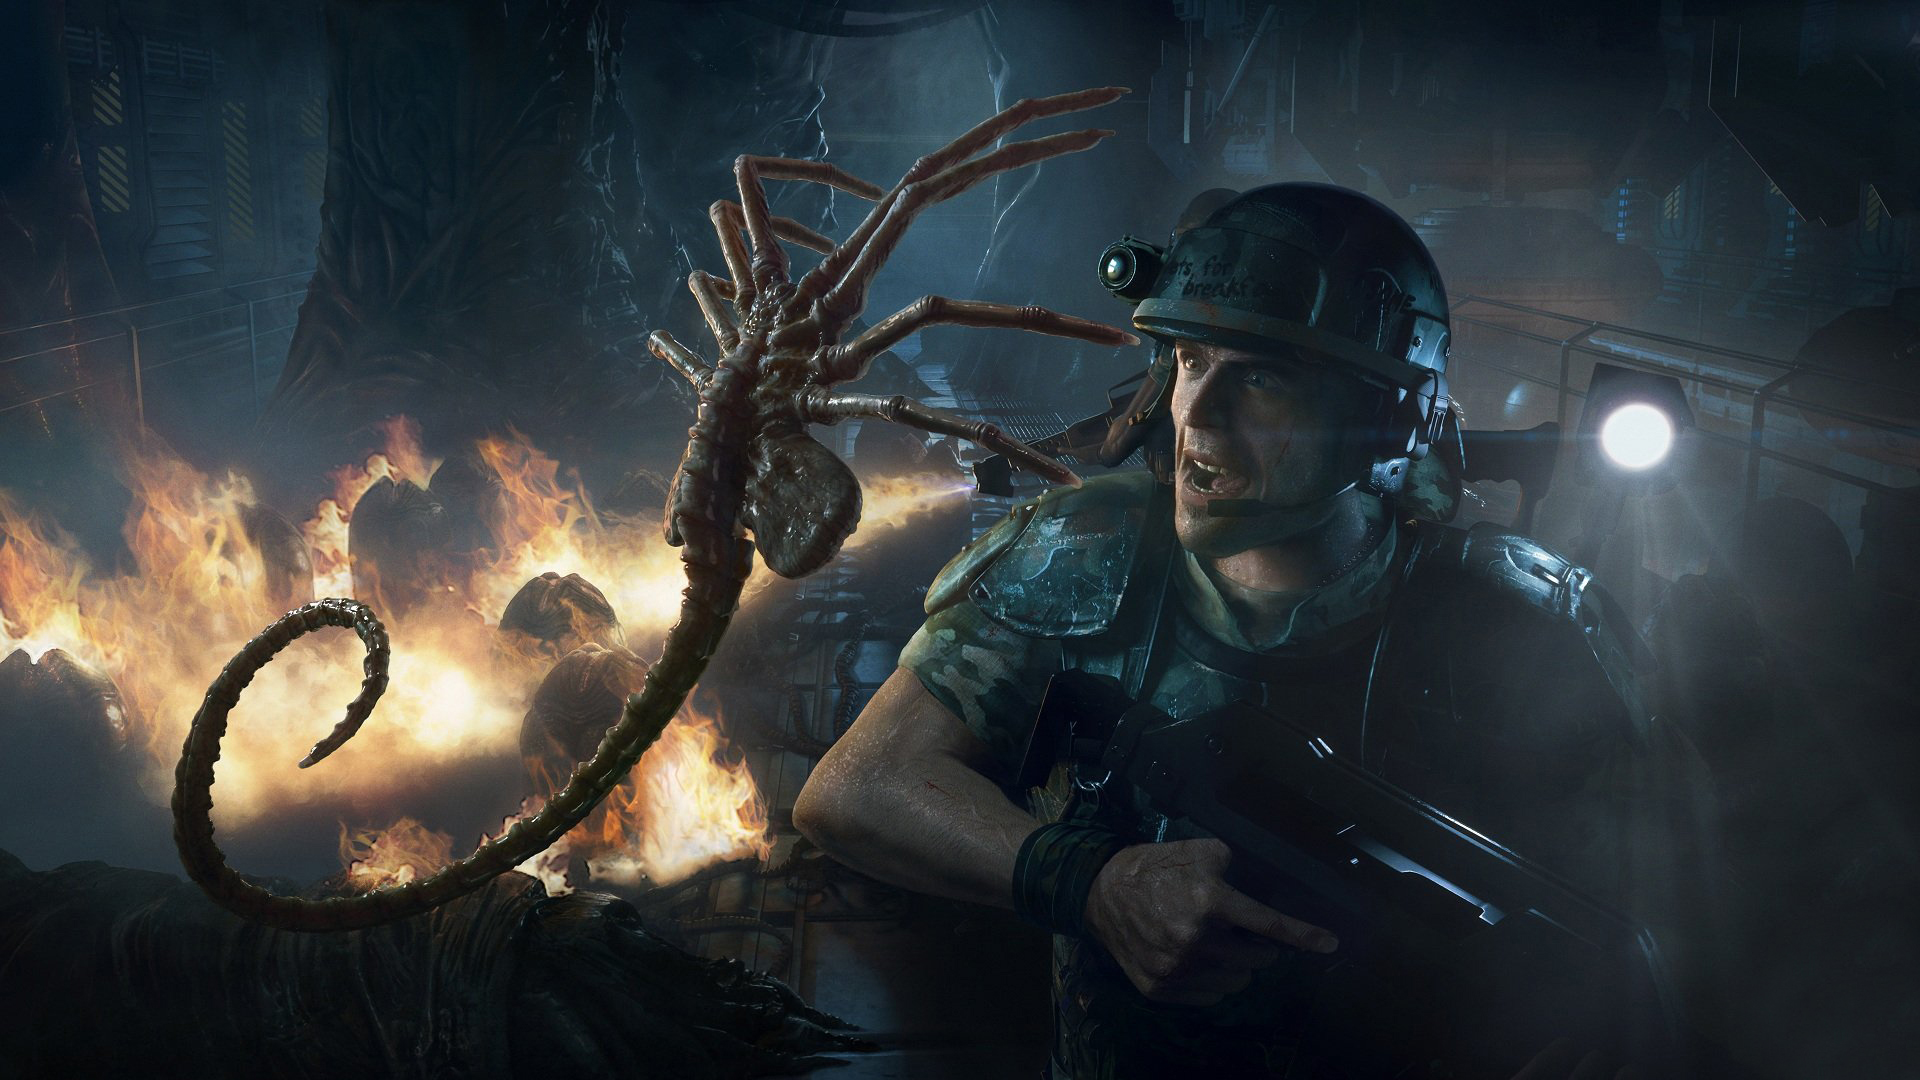 Video Game Aliens Colonial Marines 1920x1080